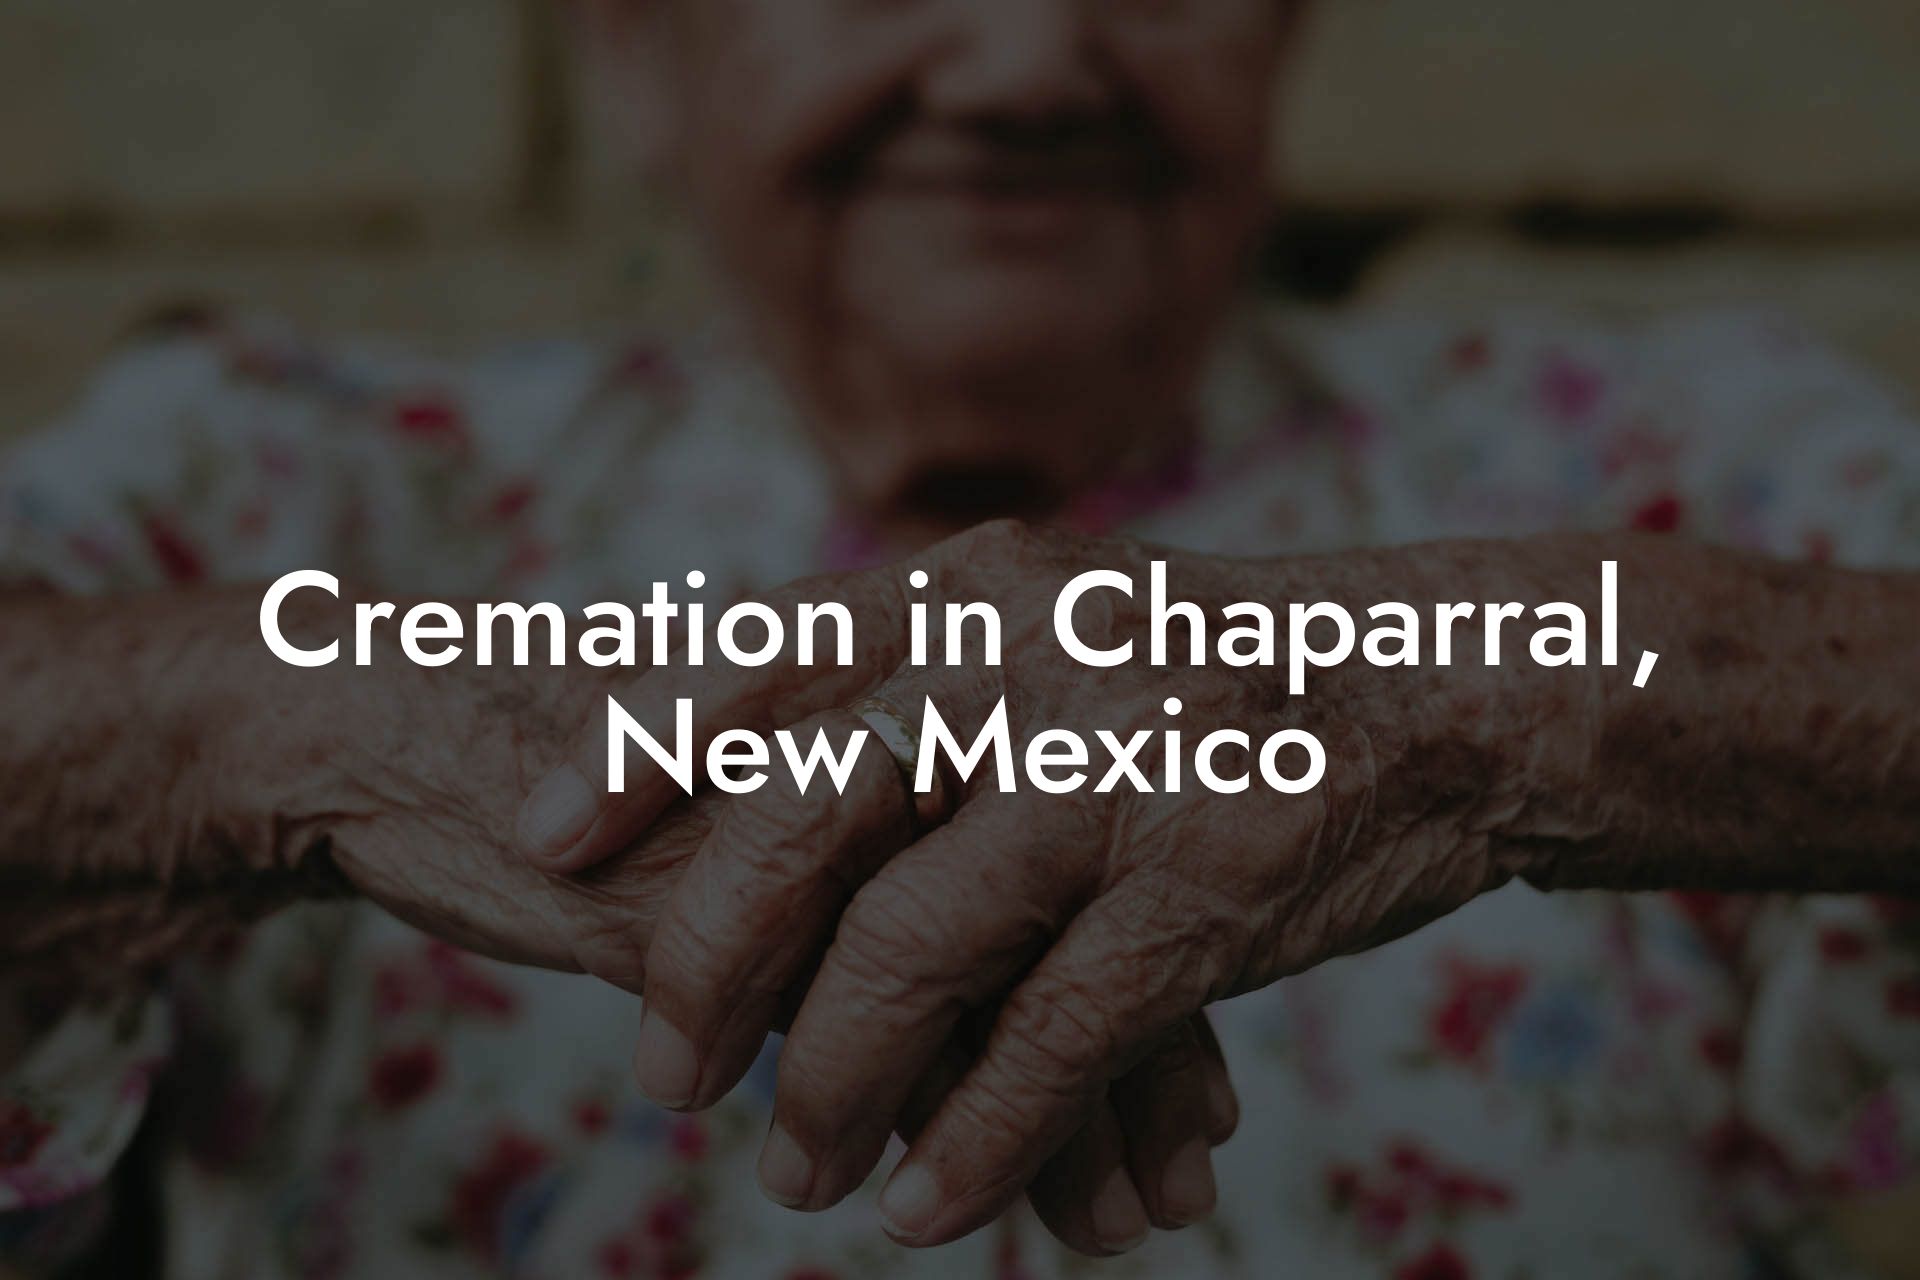 Cremation in Chaparral, New Mexico